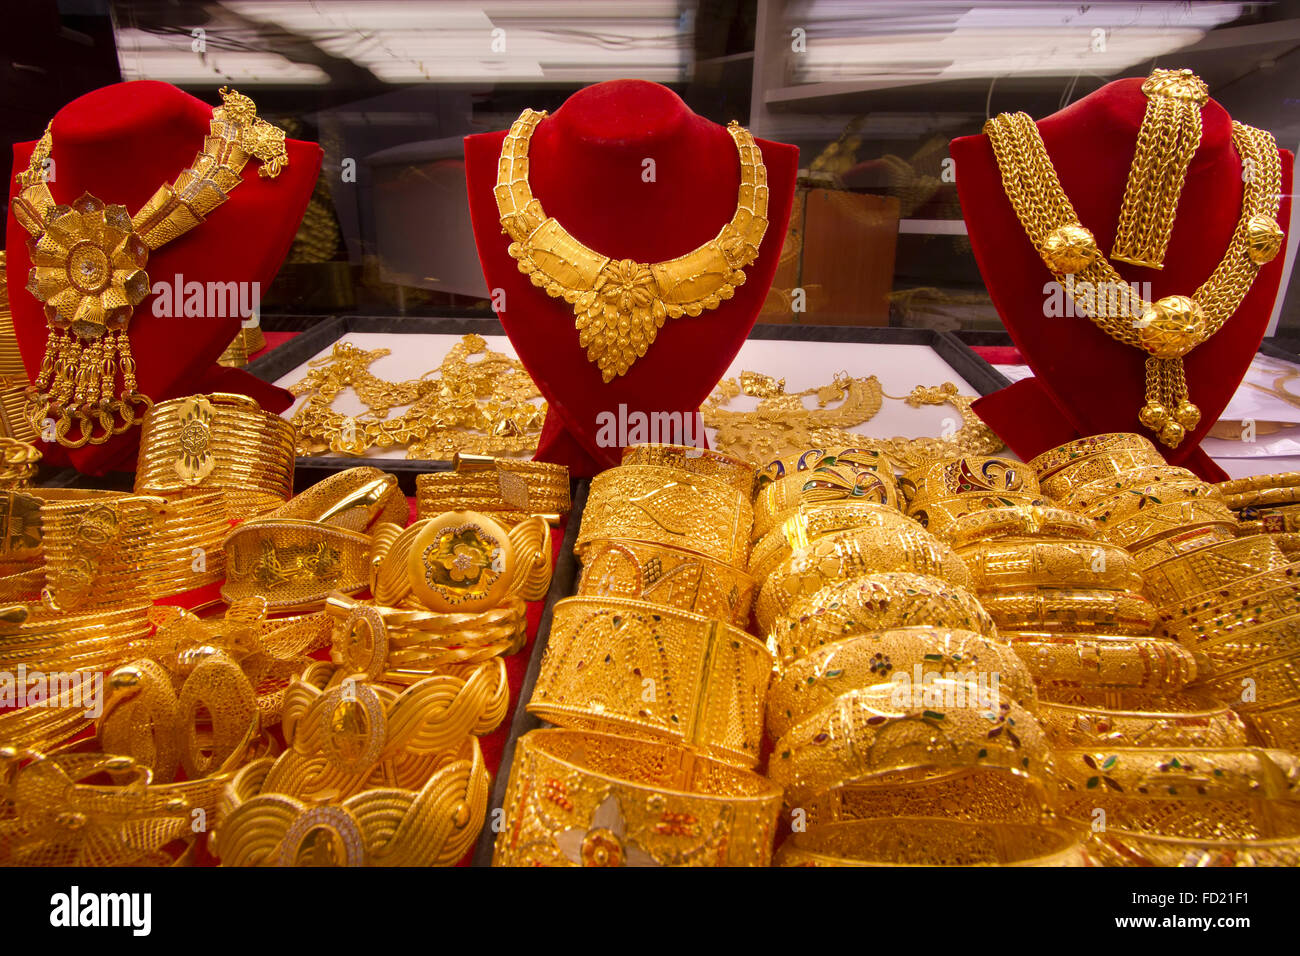 Arap gold - Identical displays can be seen in gold souqs in all the ...